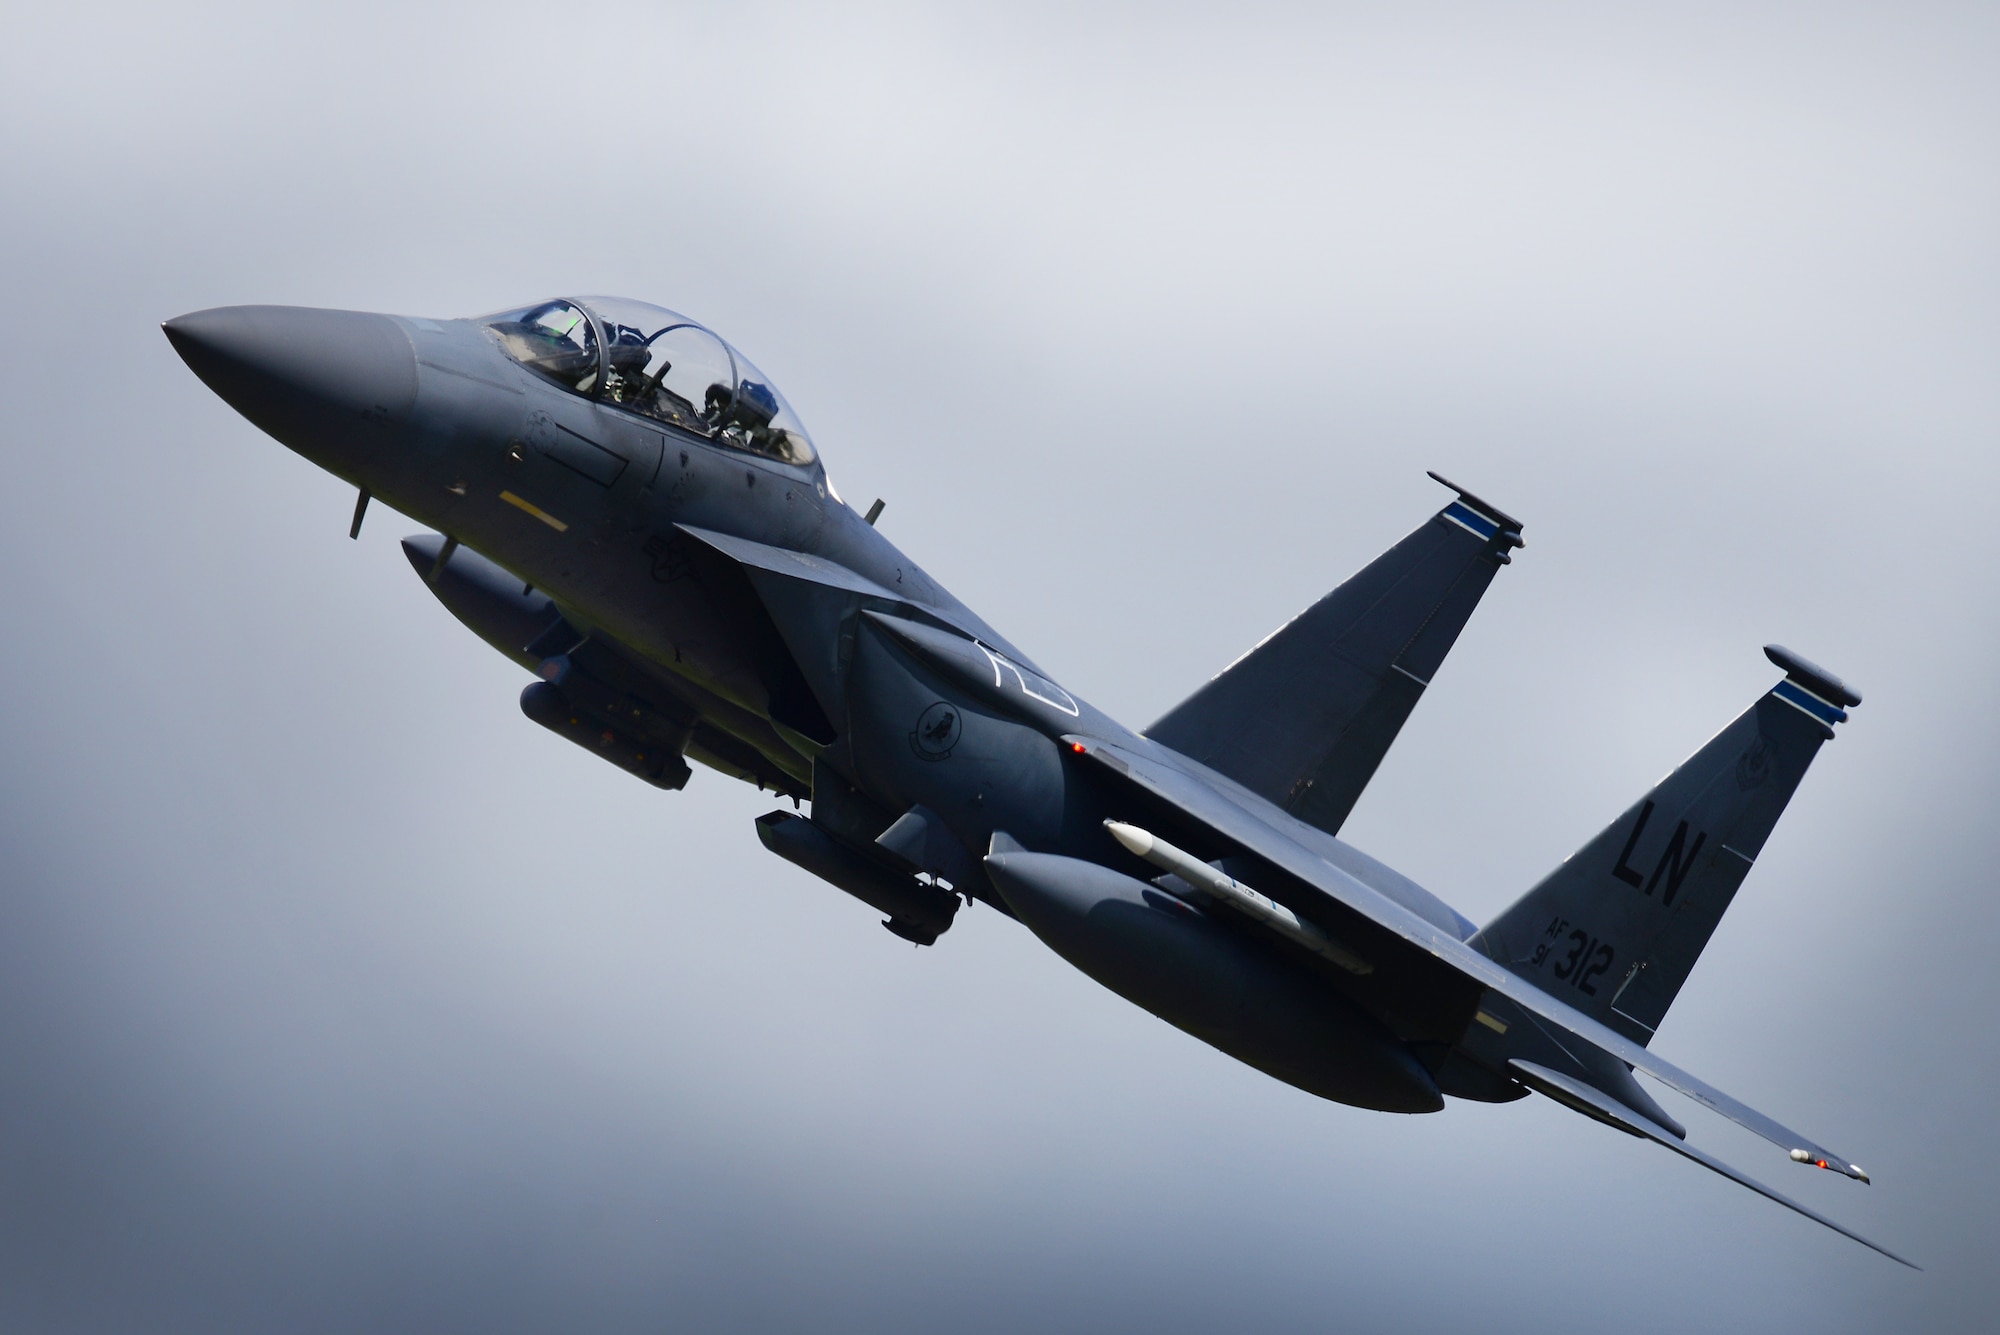 An F-15E Strike Eagle assigned to the 492nd Fighter Squadron flies over Royal Air Force Lakenheath, England, May 10. The 492nd trains regularly to ensure RAF Lakenheath brings unique air combat capabilities to the fight. (U.S. Air Force photo/ Tech. Sgt. Matthew Plew)